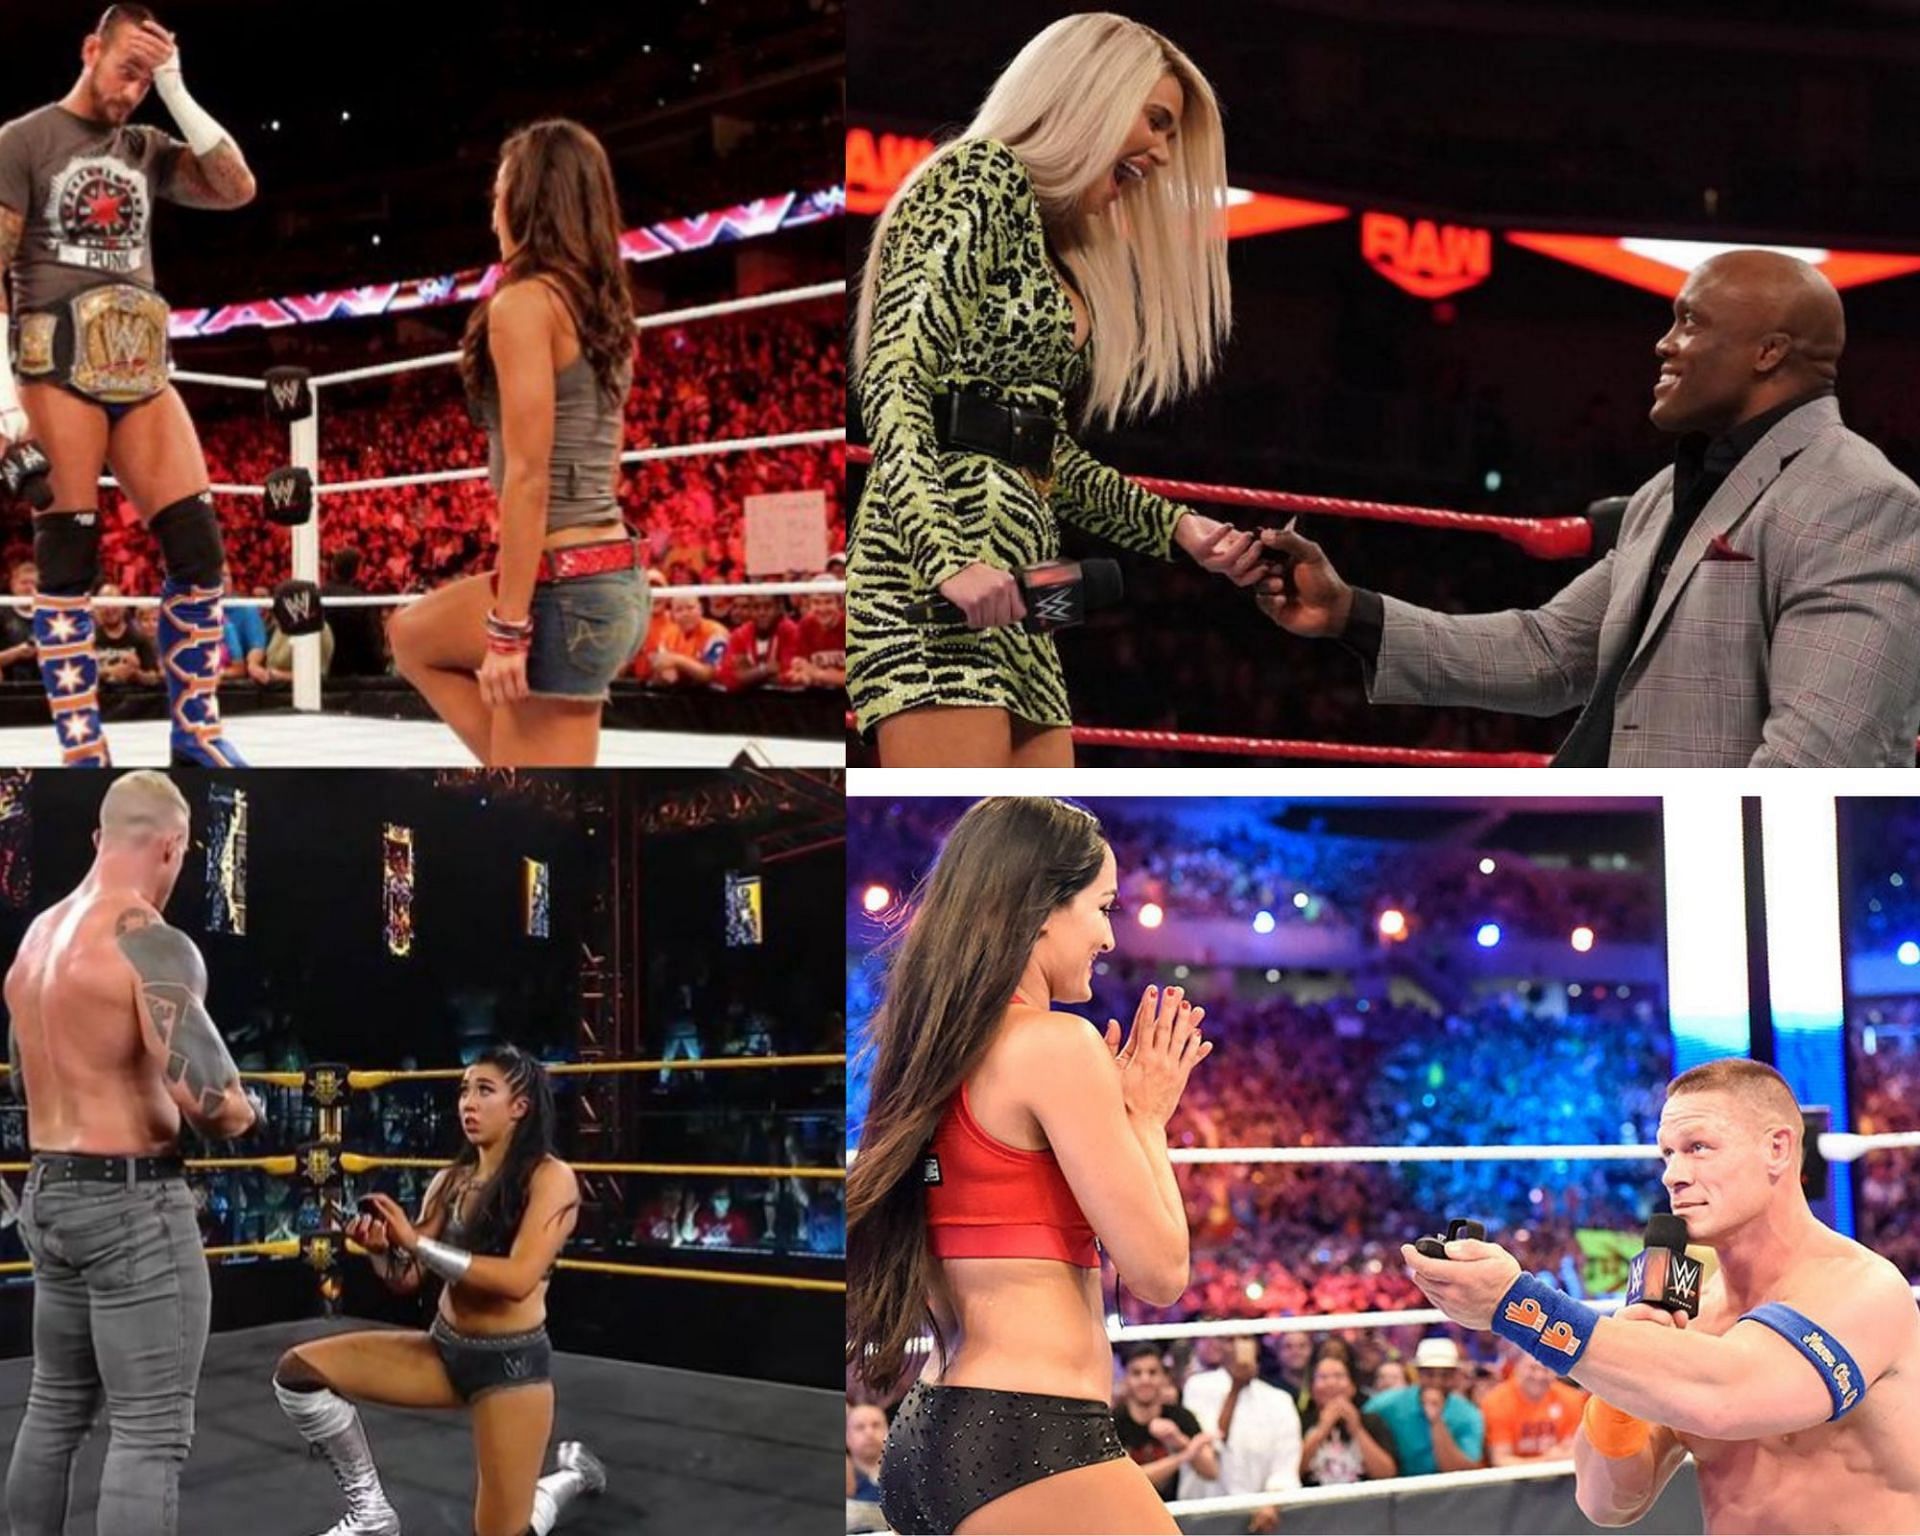 Many WWE couples have gotten engaged on-screen over the years